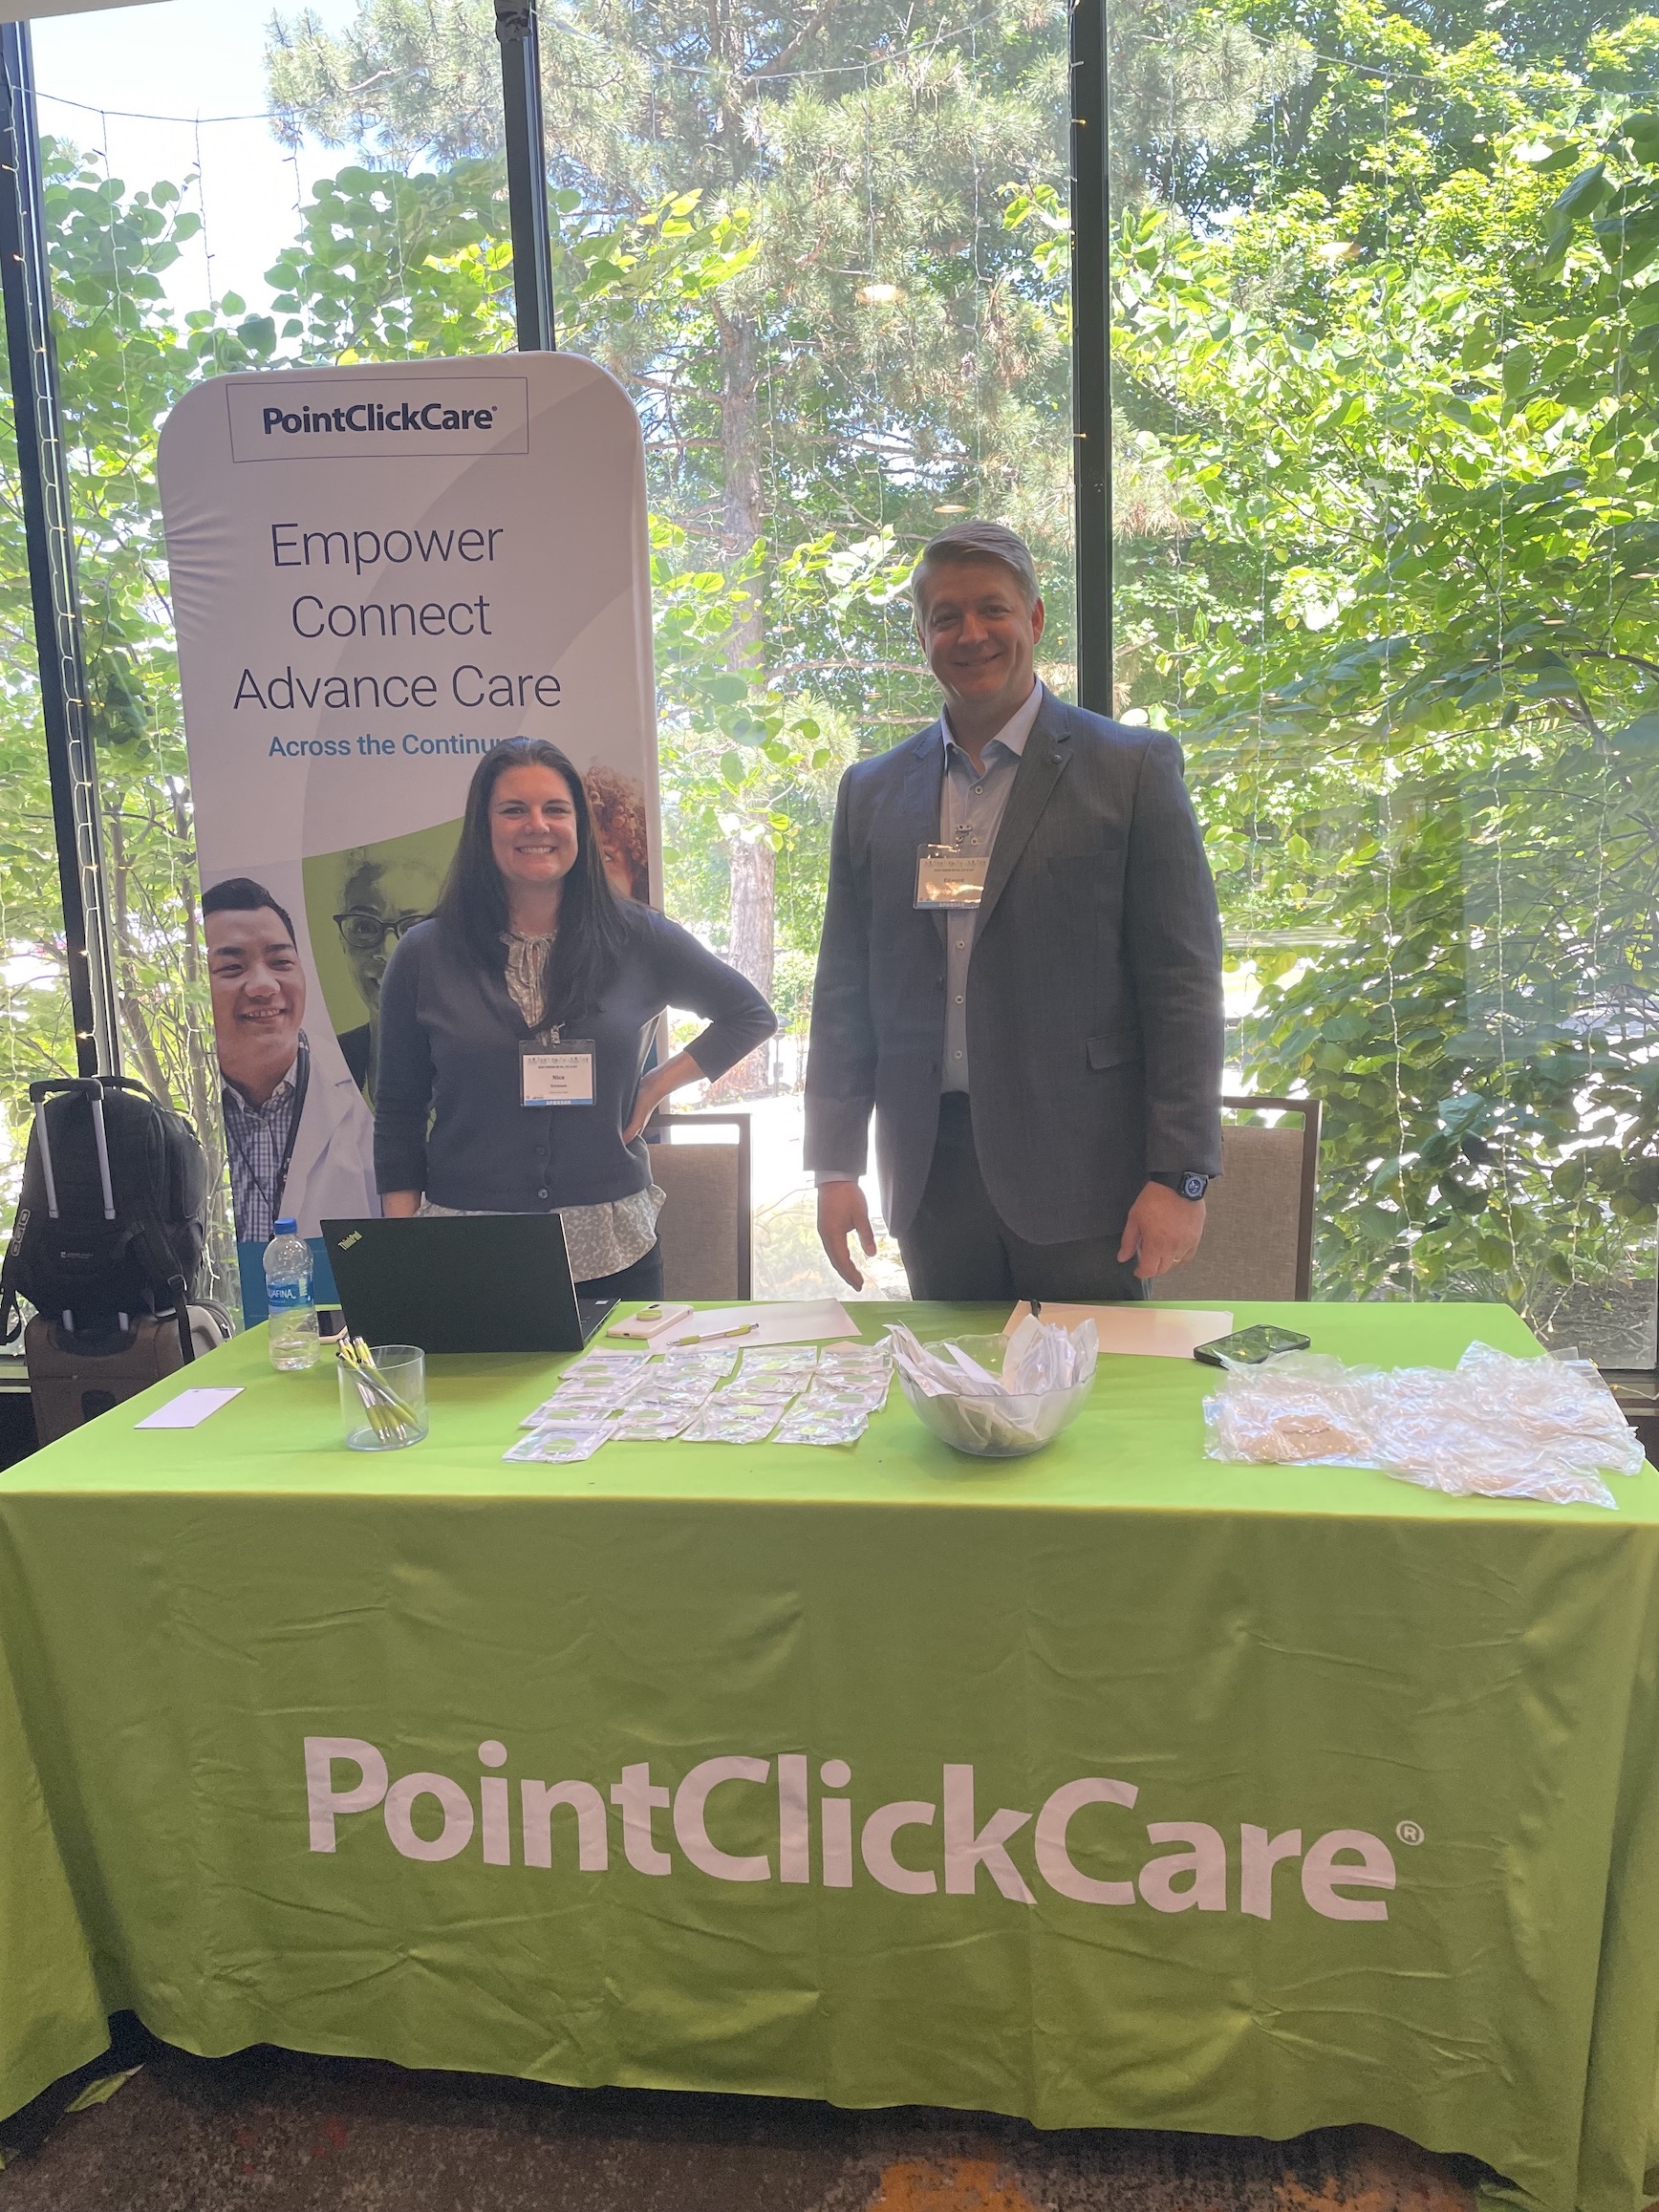 Booth Point Click Care